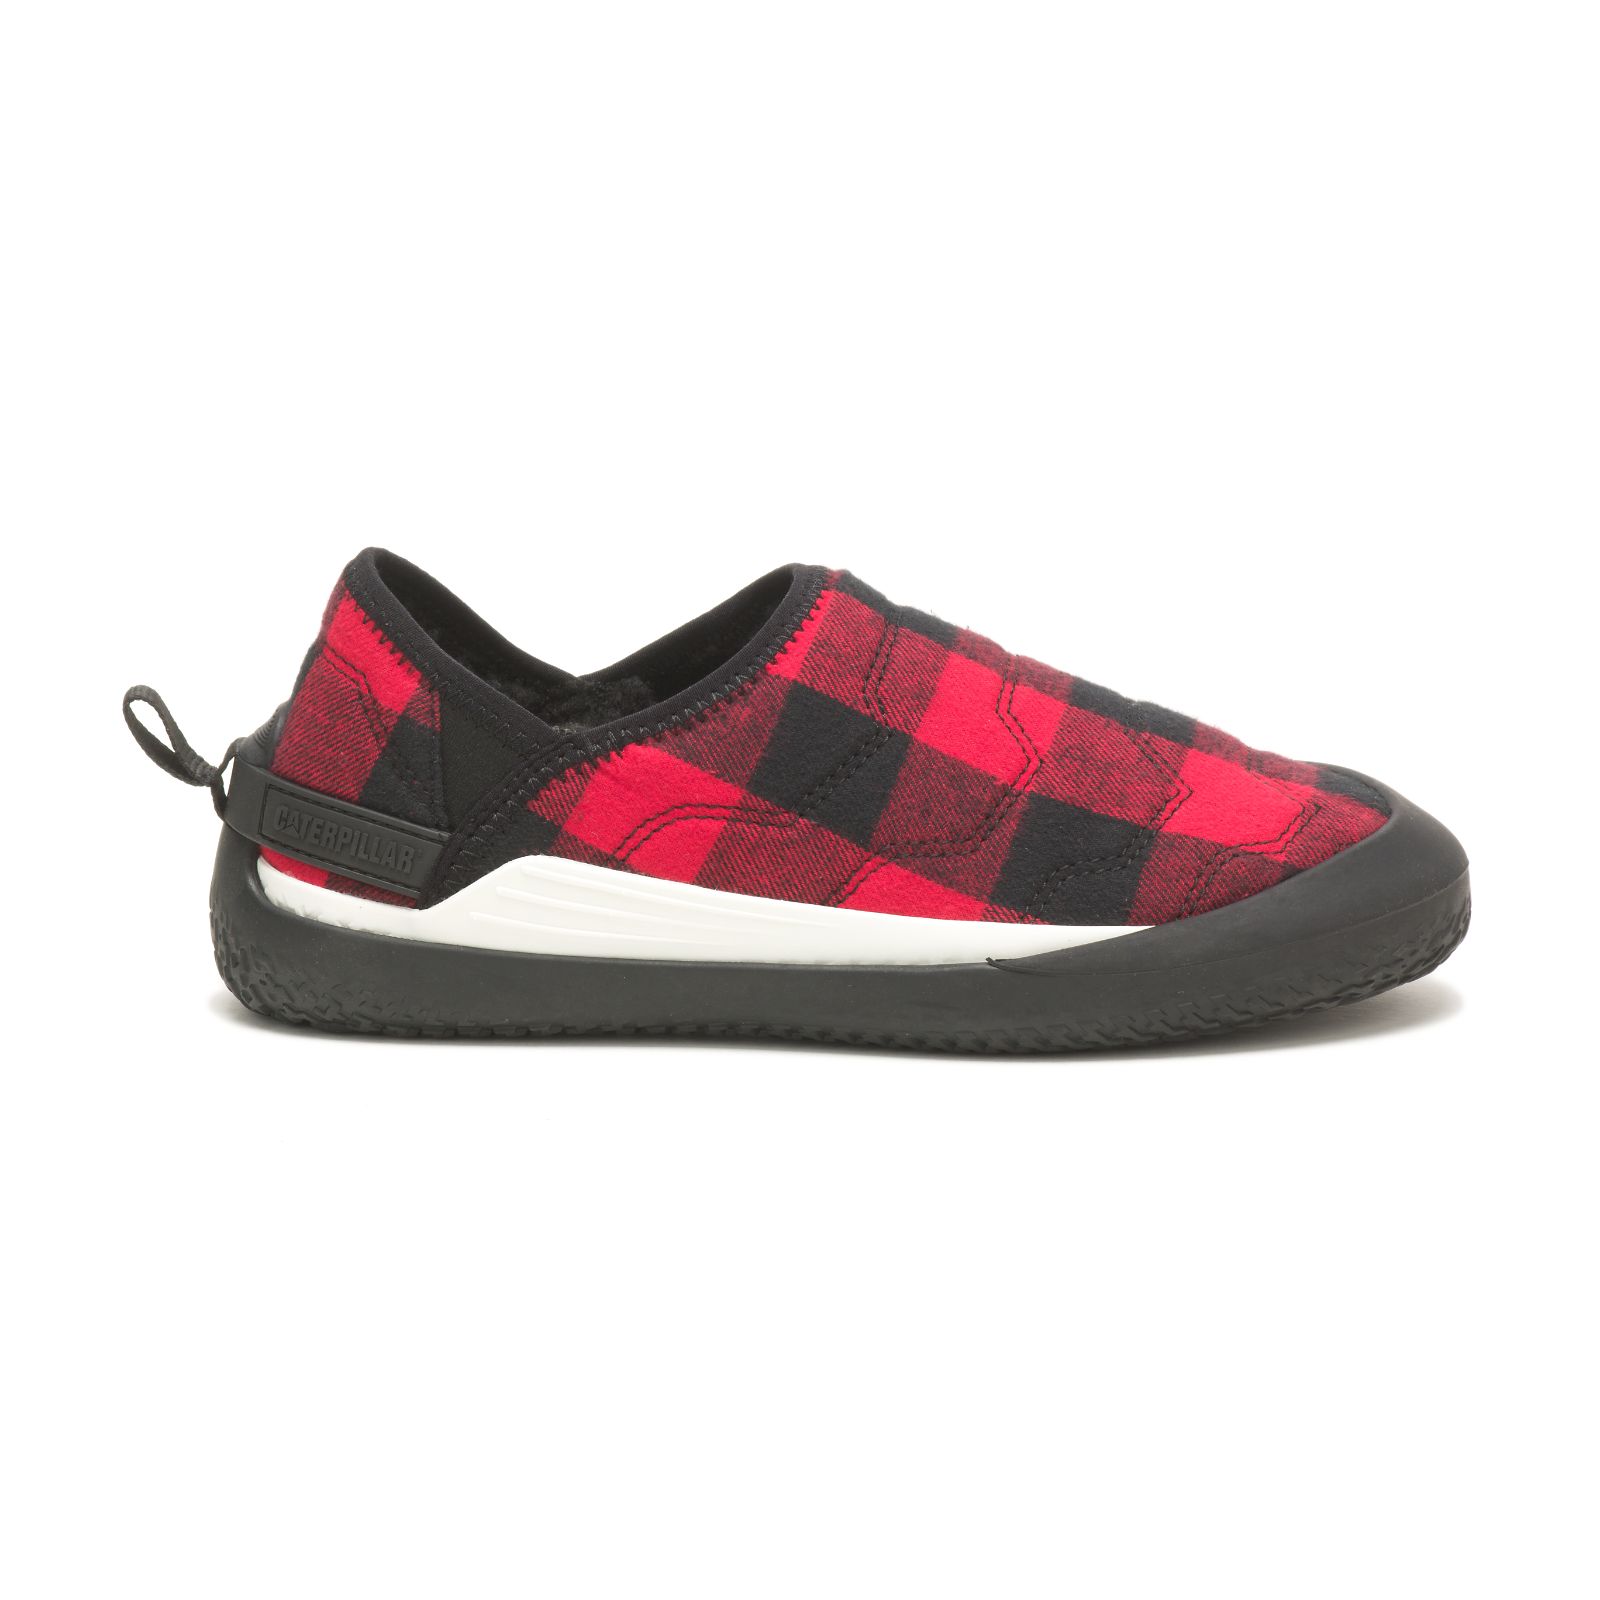 Caterpillar Shoes Online Pakistan - Caterpillar Crossover Womens Slip On Shoes Red (956278-FDR)